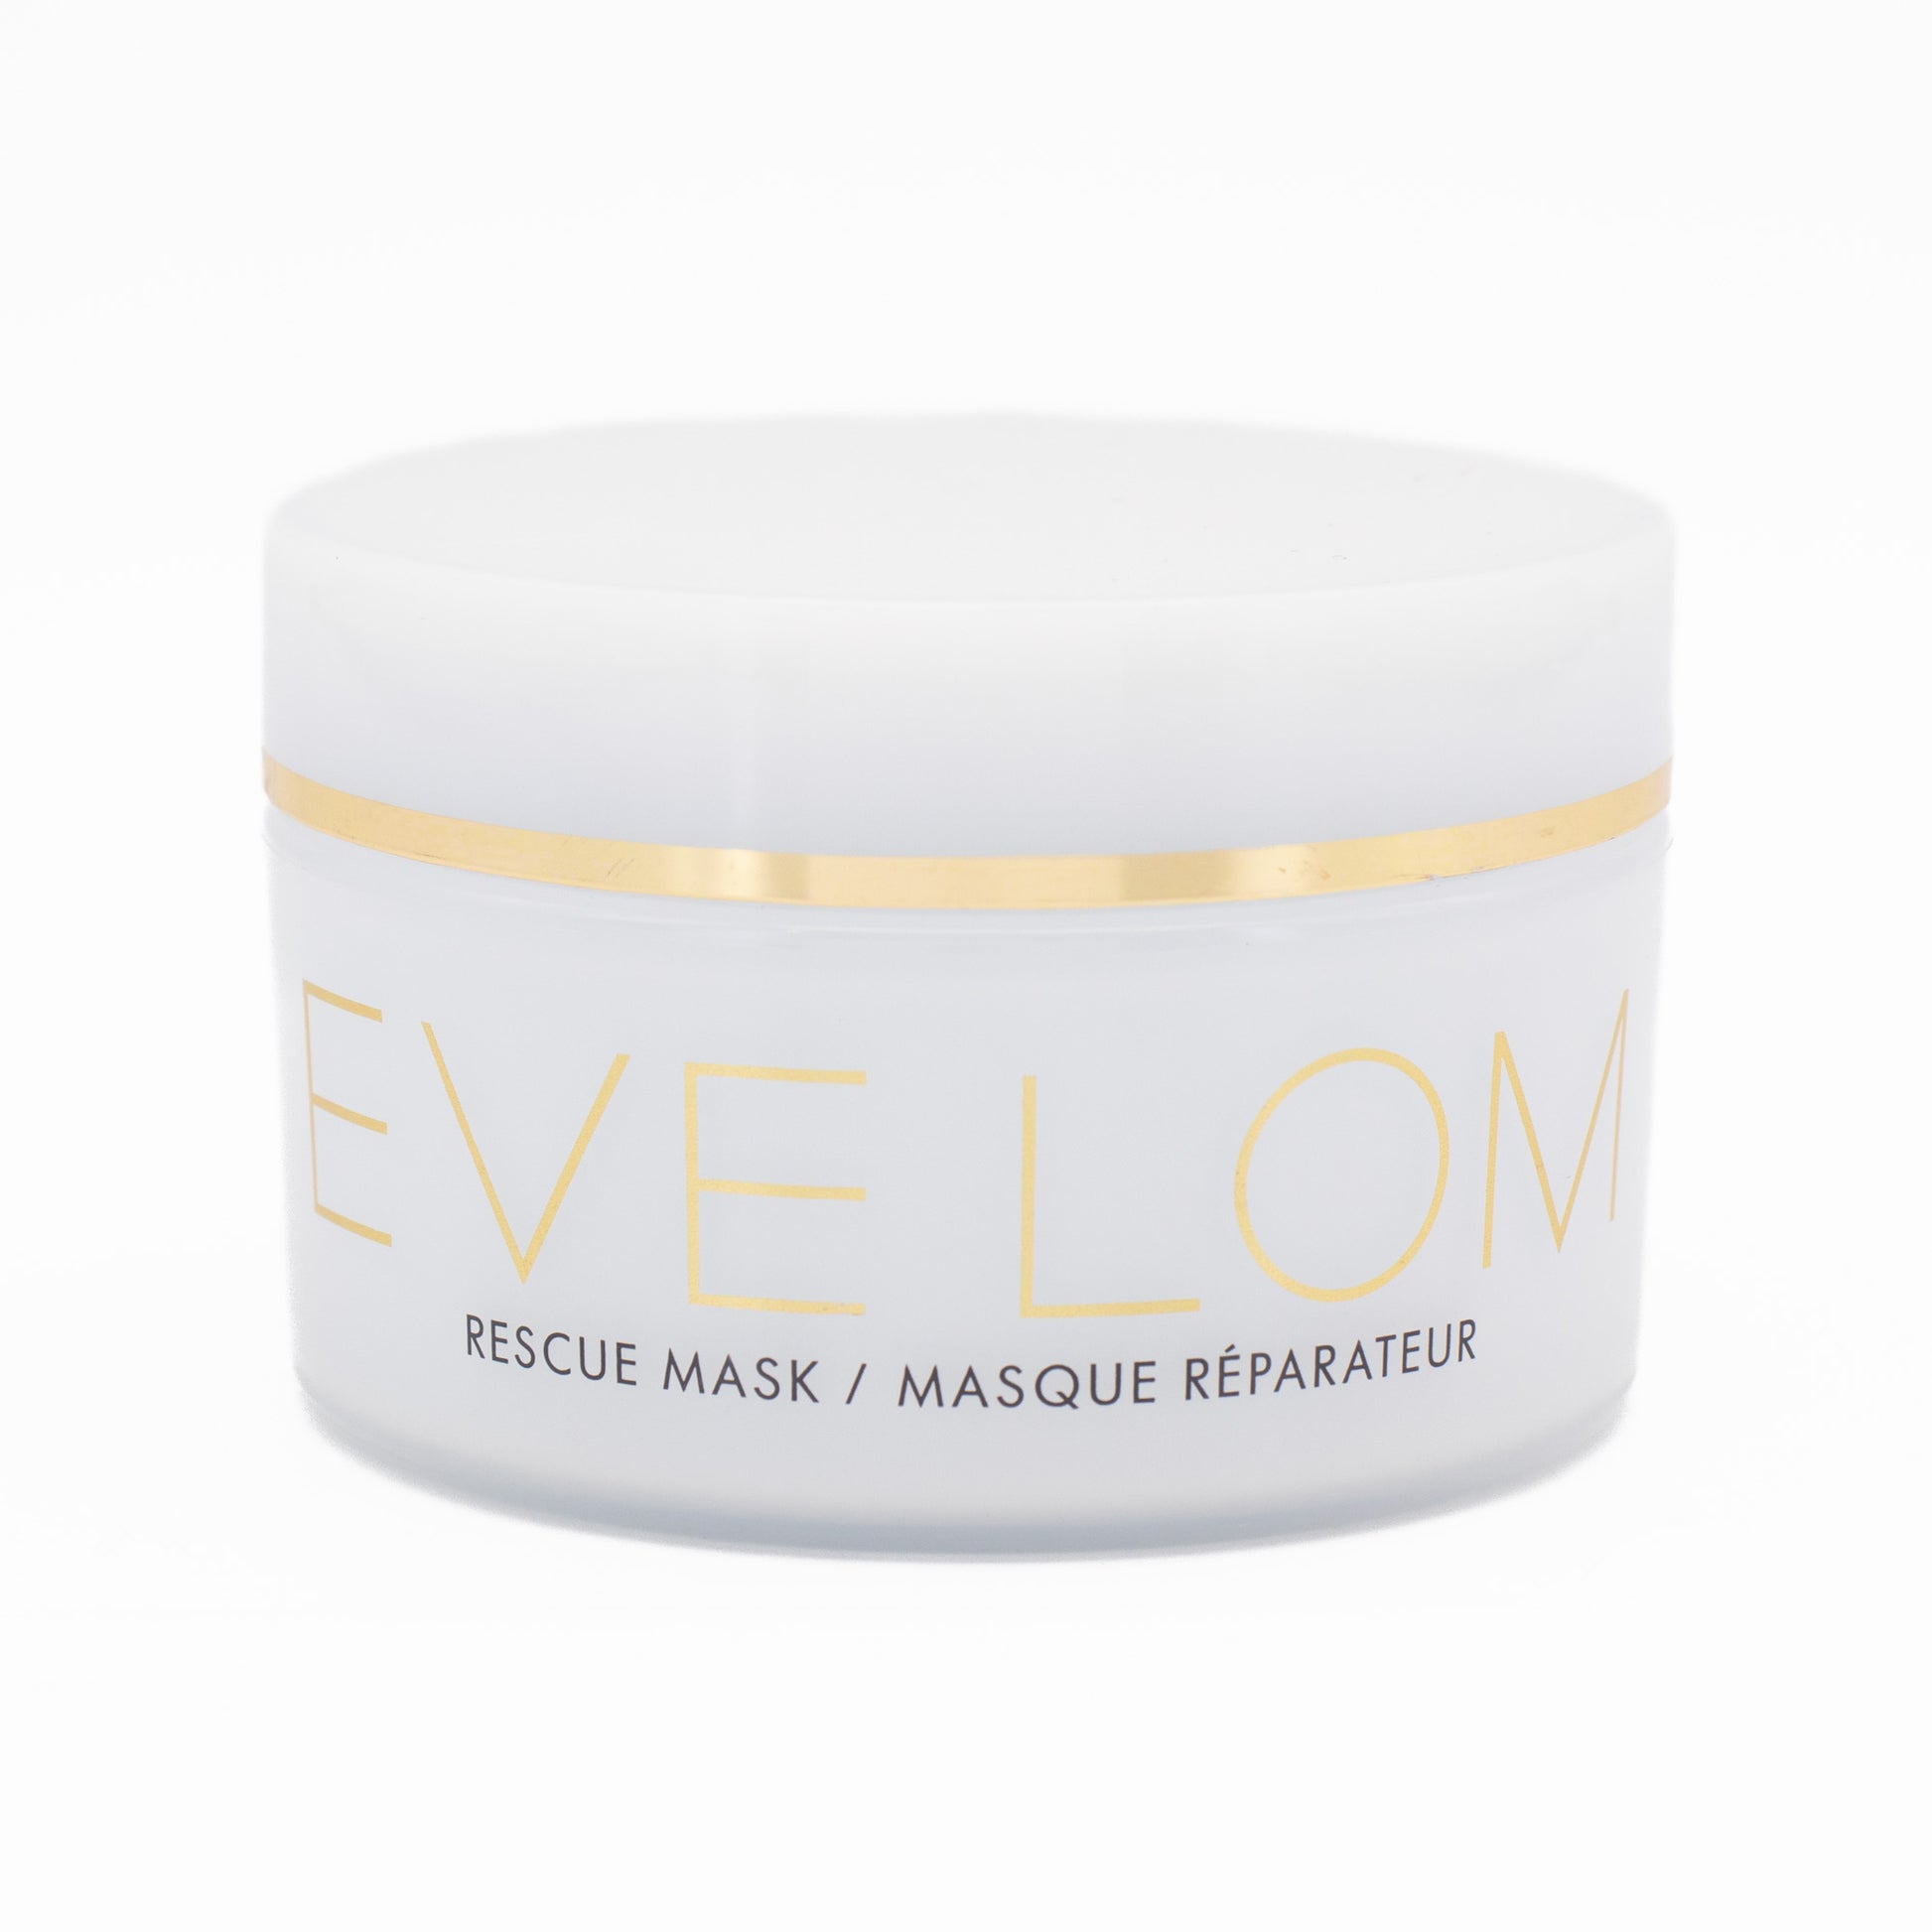 Eve Lom Rescue Mask 100ml - Missing Box - This is Beauty UK